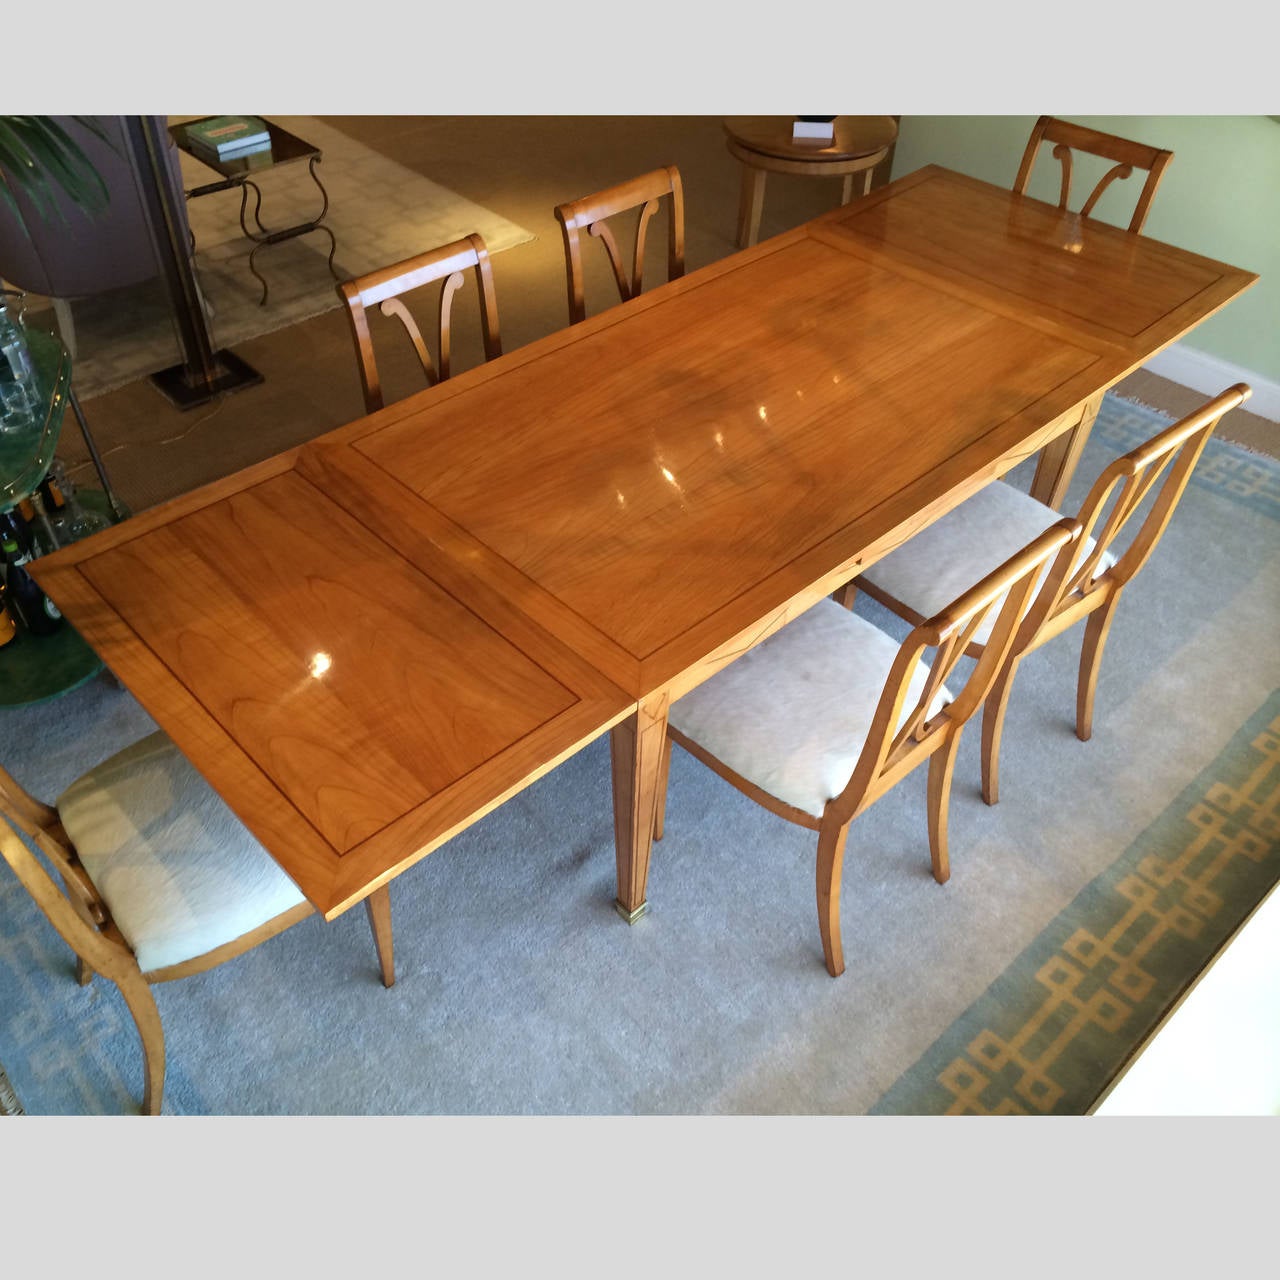 Mid-20th Century French Merisier and Brass Dining Table with Parquetry Design, circa 1940